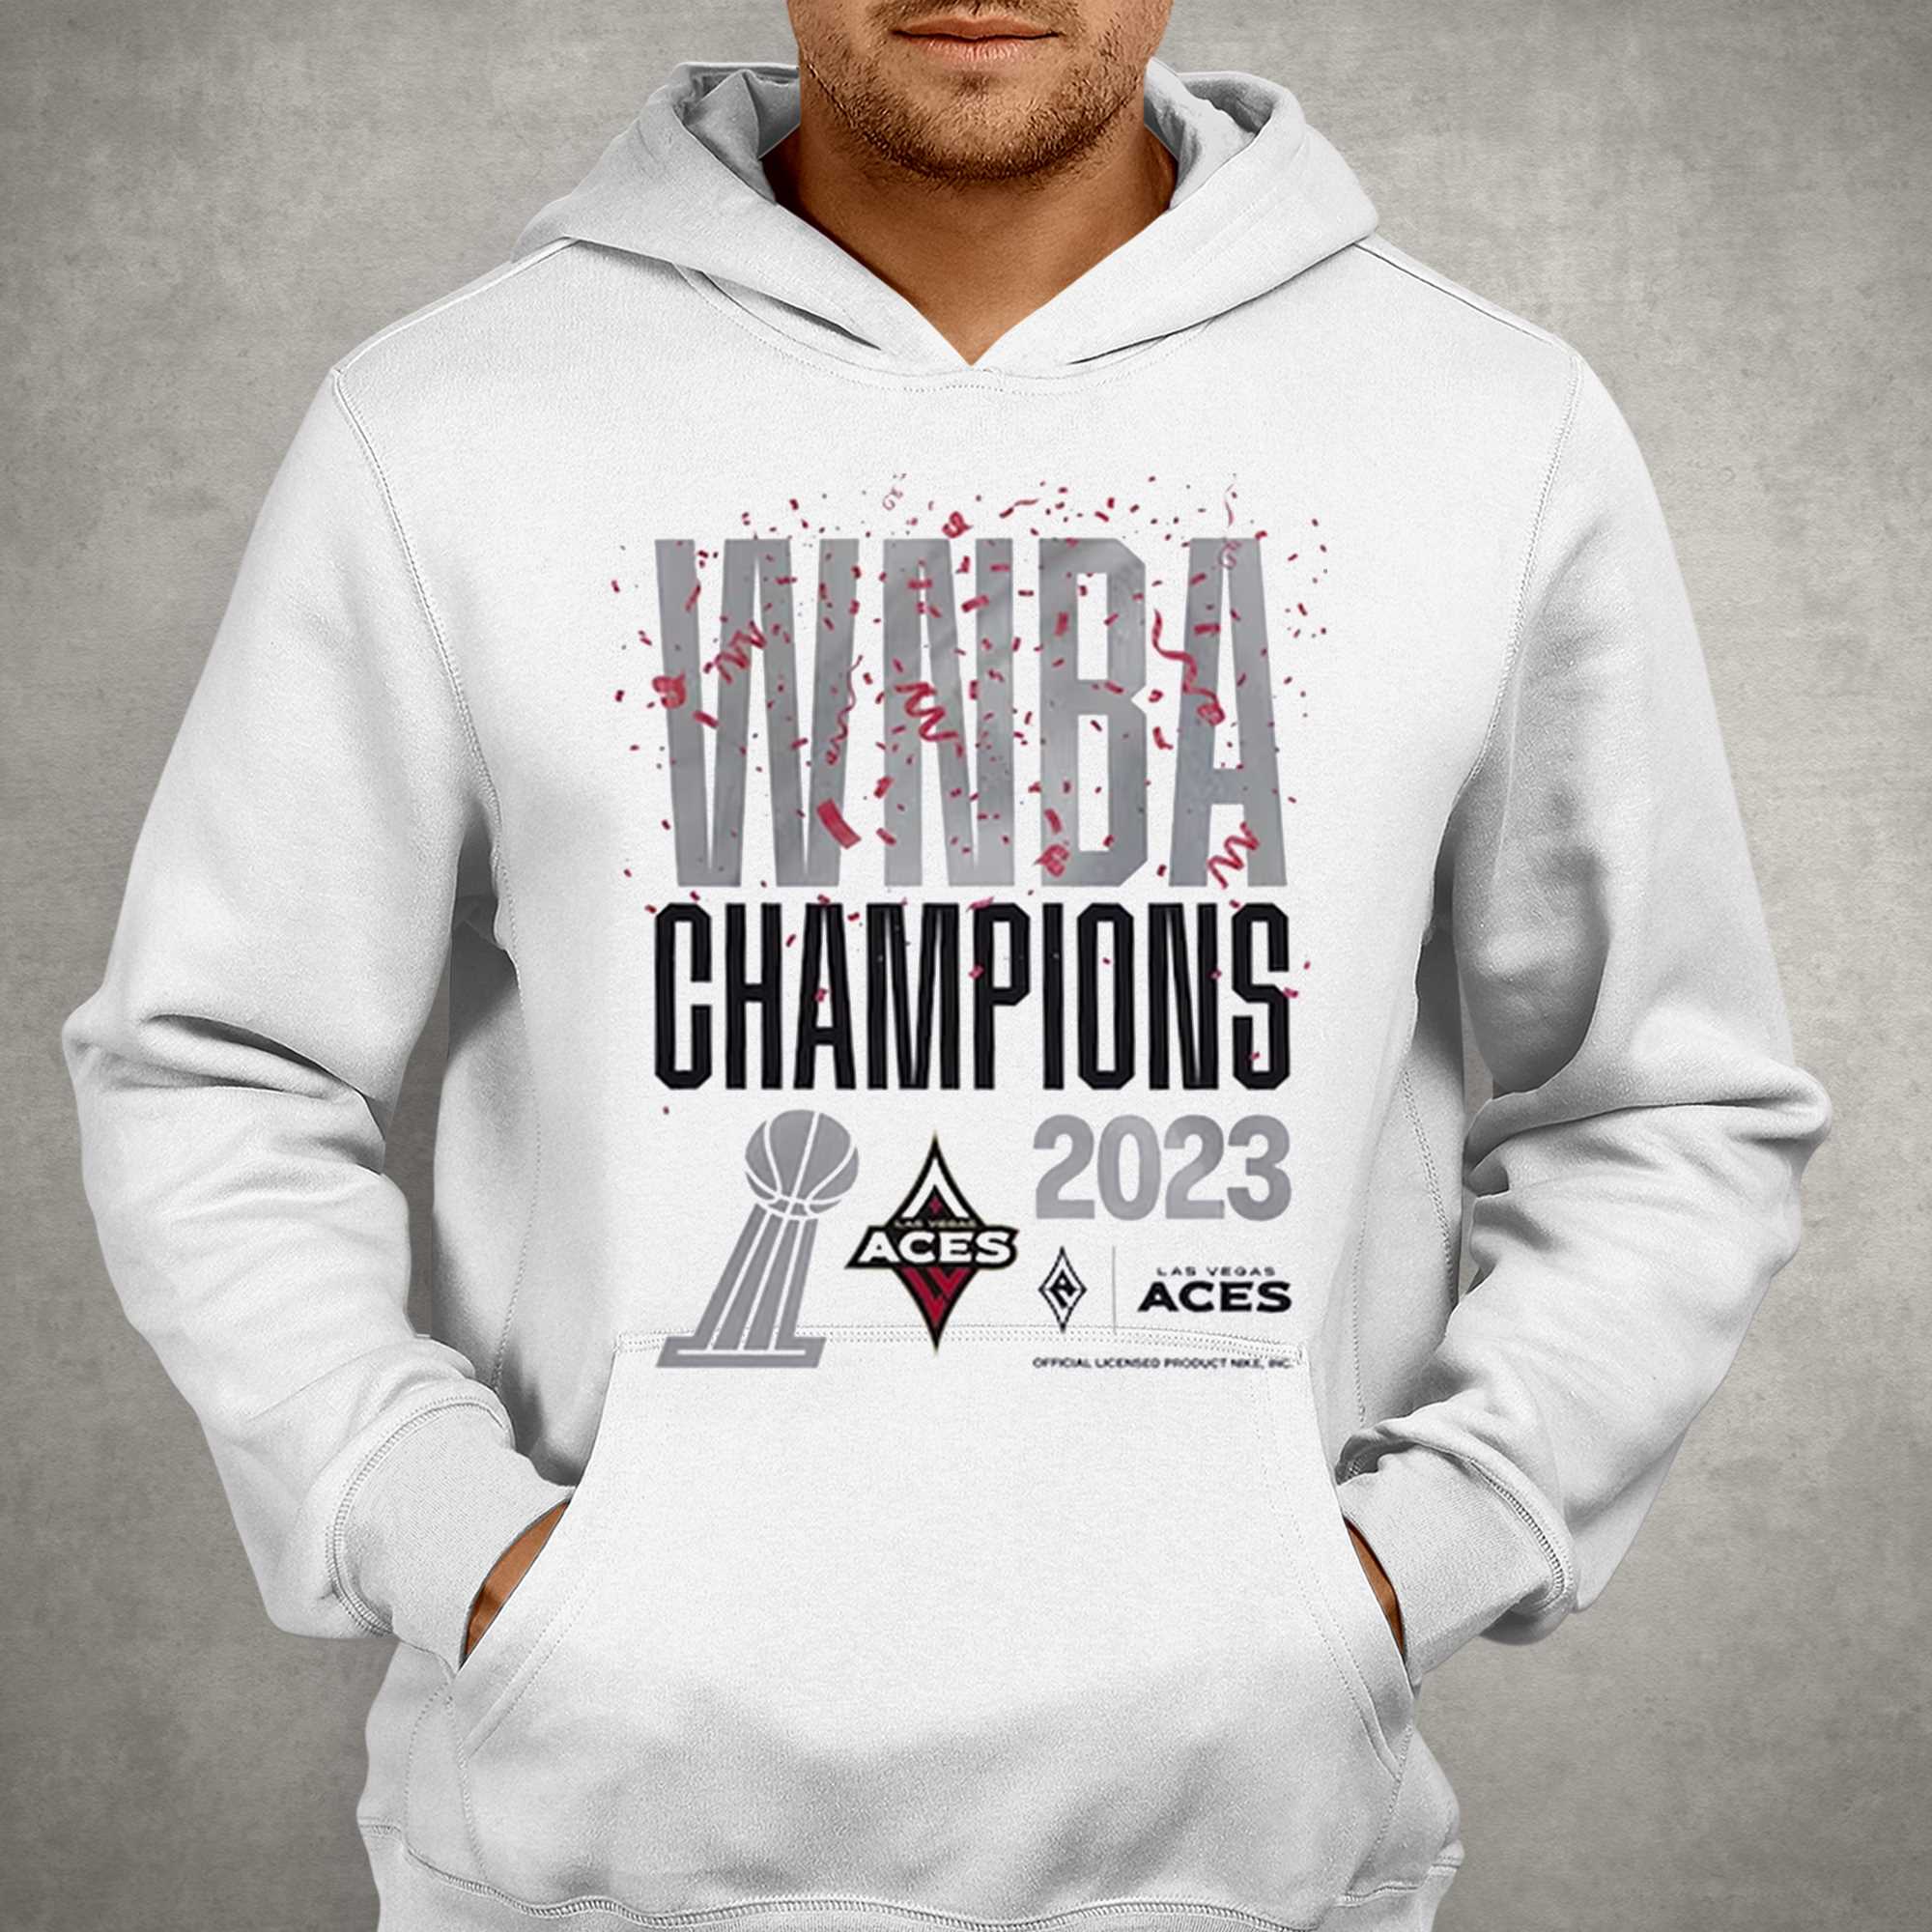 Las Vegas Aces: 2023 Champions Logo - Officially Licensed WNBA